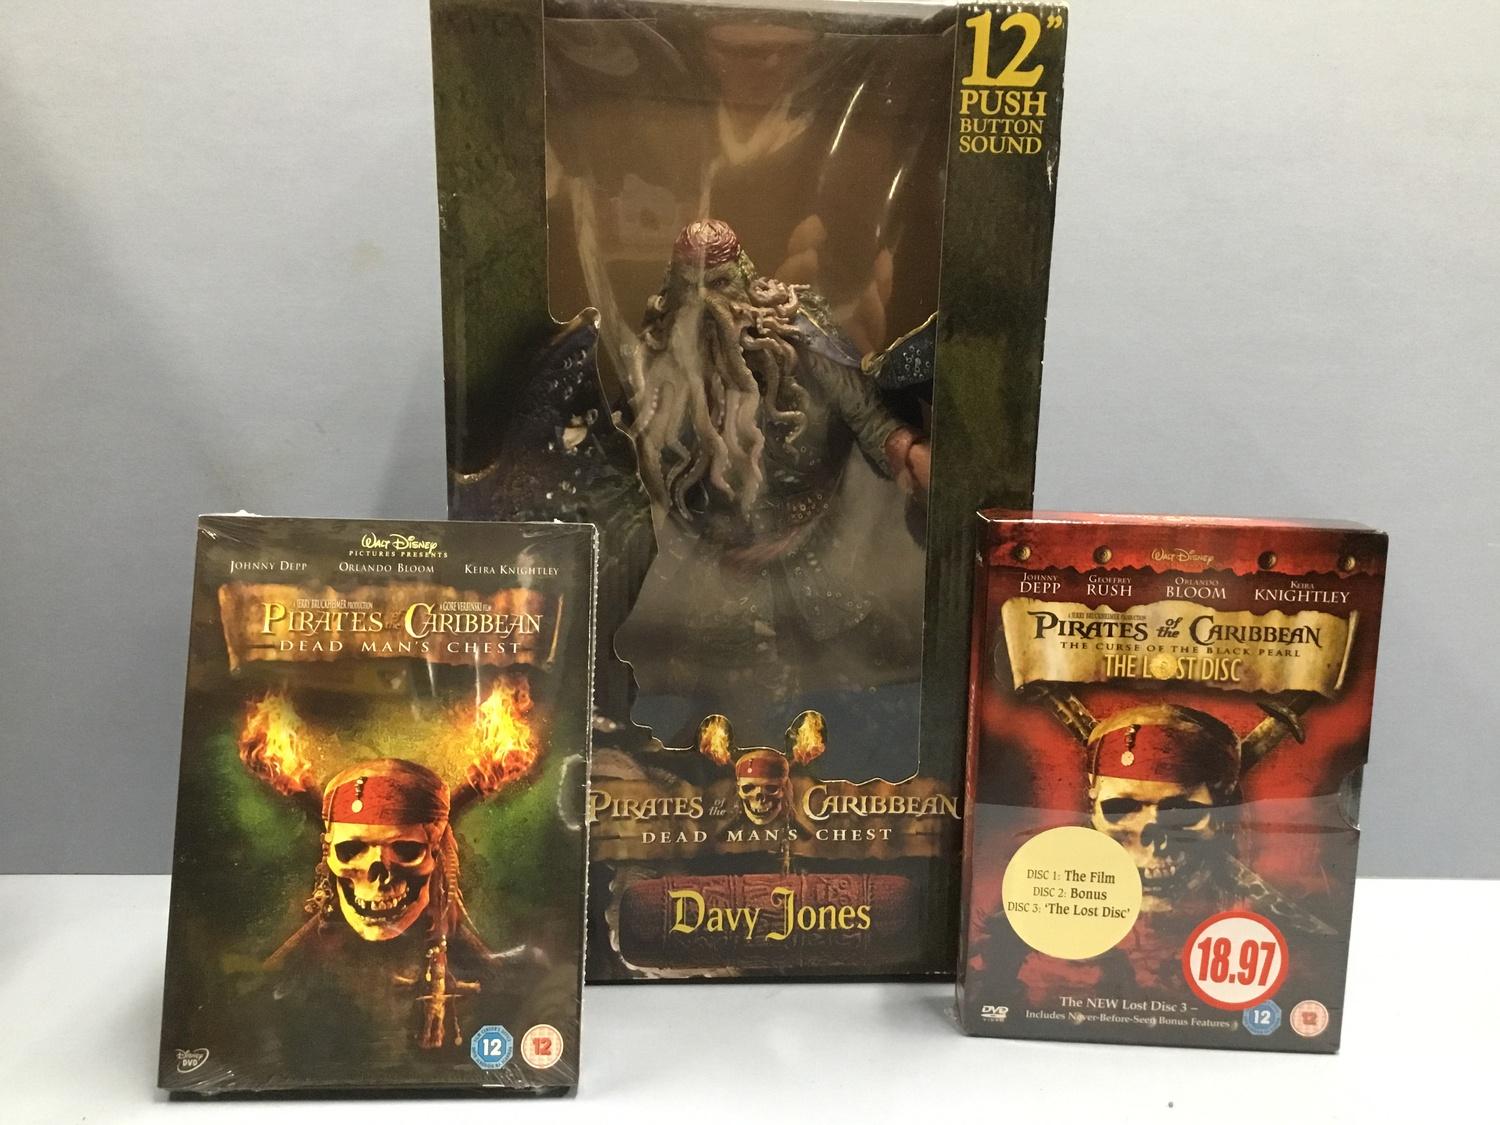 135 - Pirates Of The Caribbean Davy Jones 12" Figure 'Curse Of The Black Pearl' & DVD's - Image 2 of 2